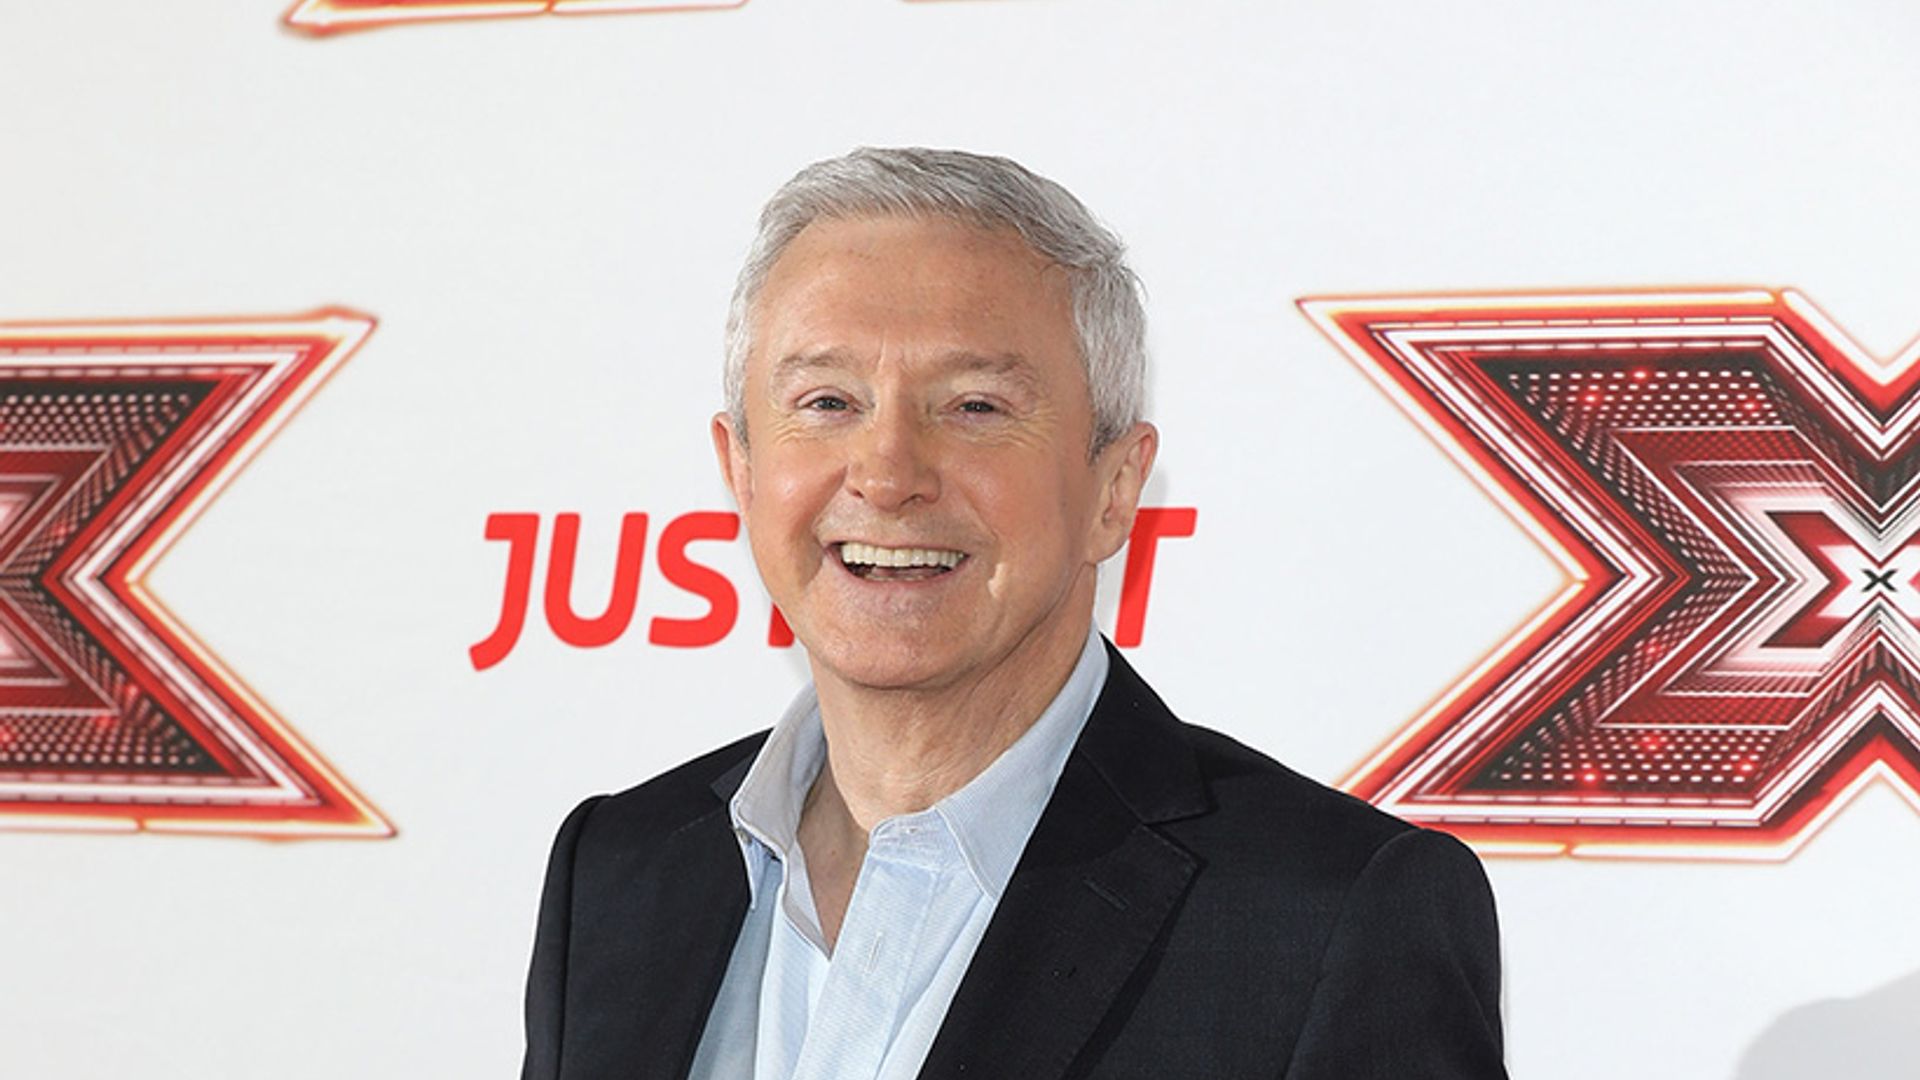 Louis Walsh speaks out after X Factor sacking reports